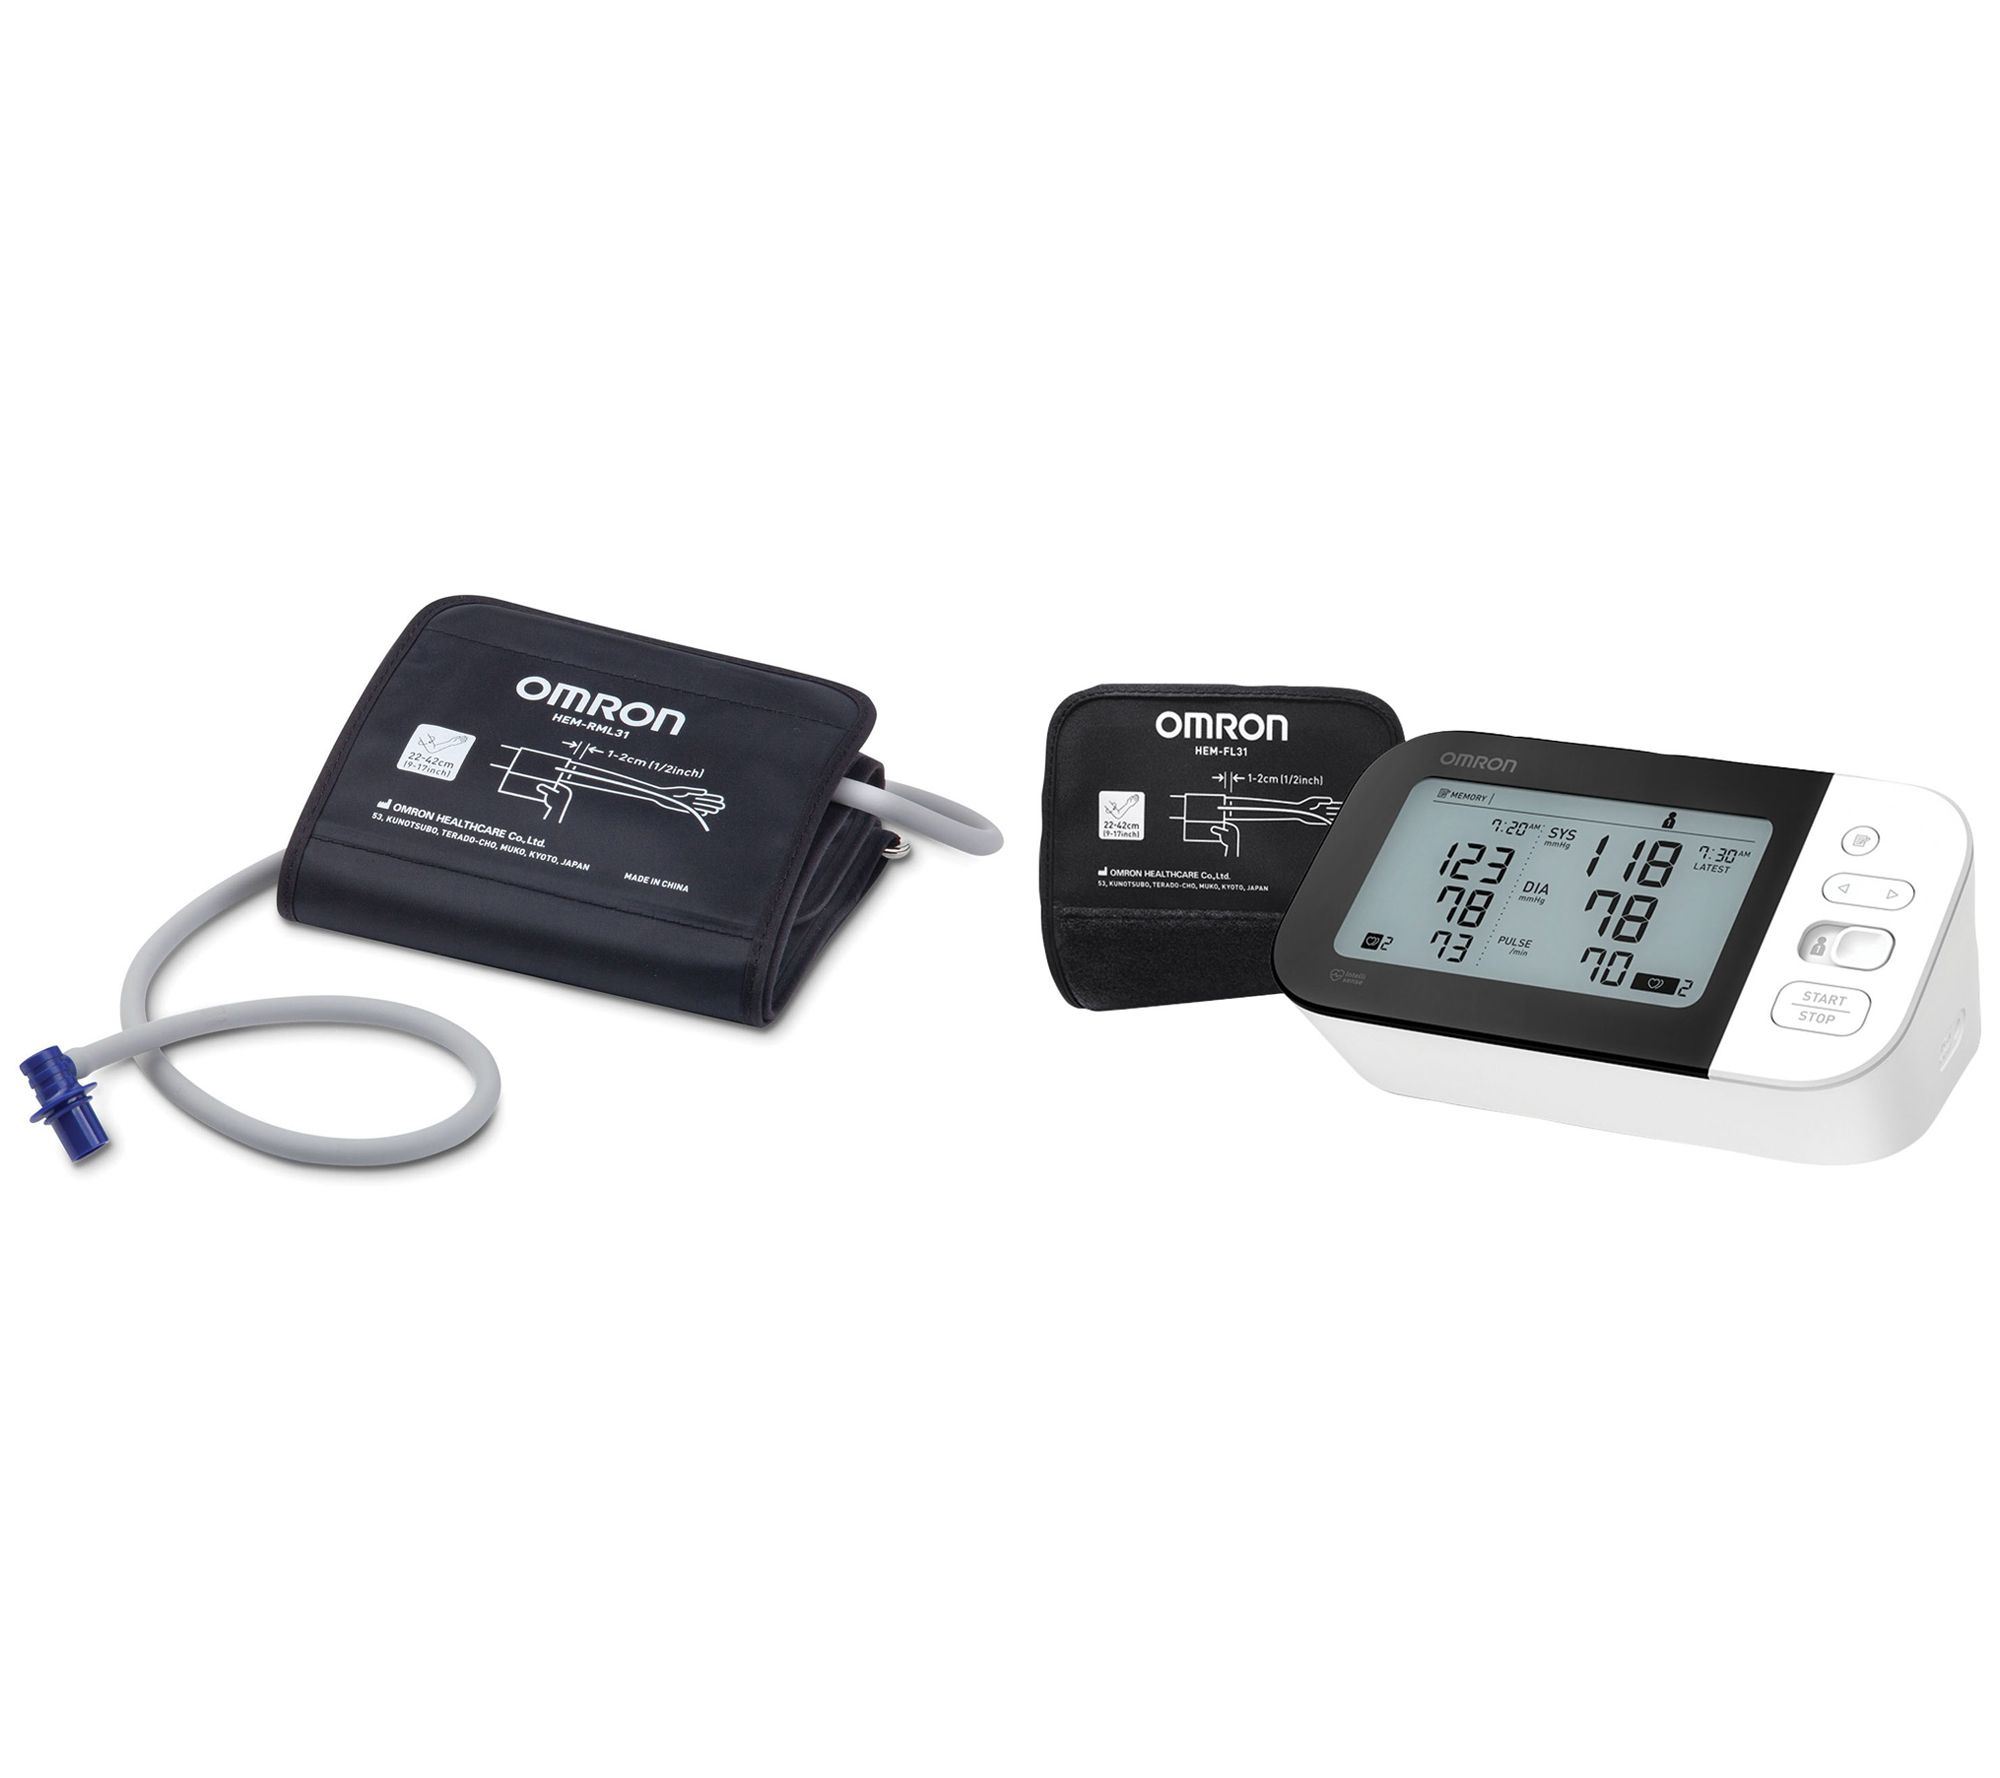 Omron 7 Series Upper Arm Blood Pressure Monitor with Cuff that